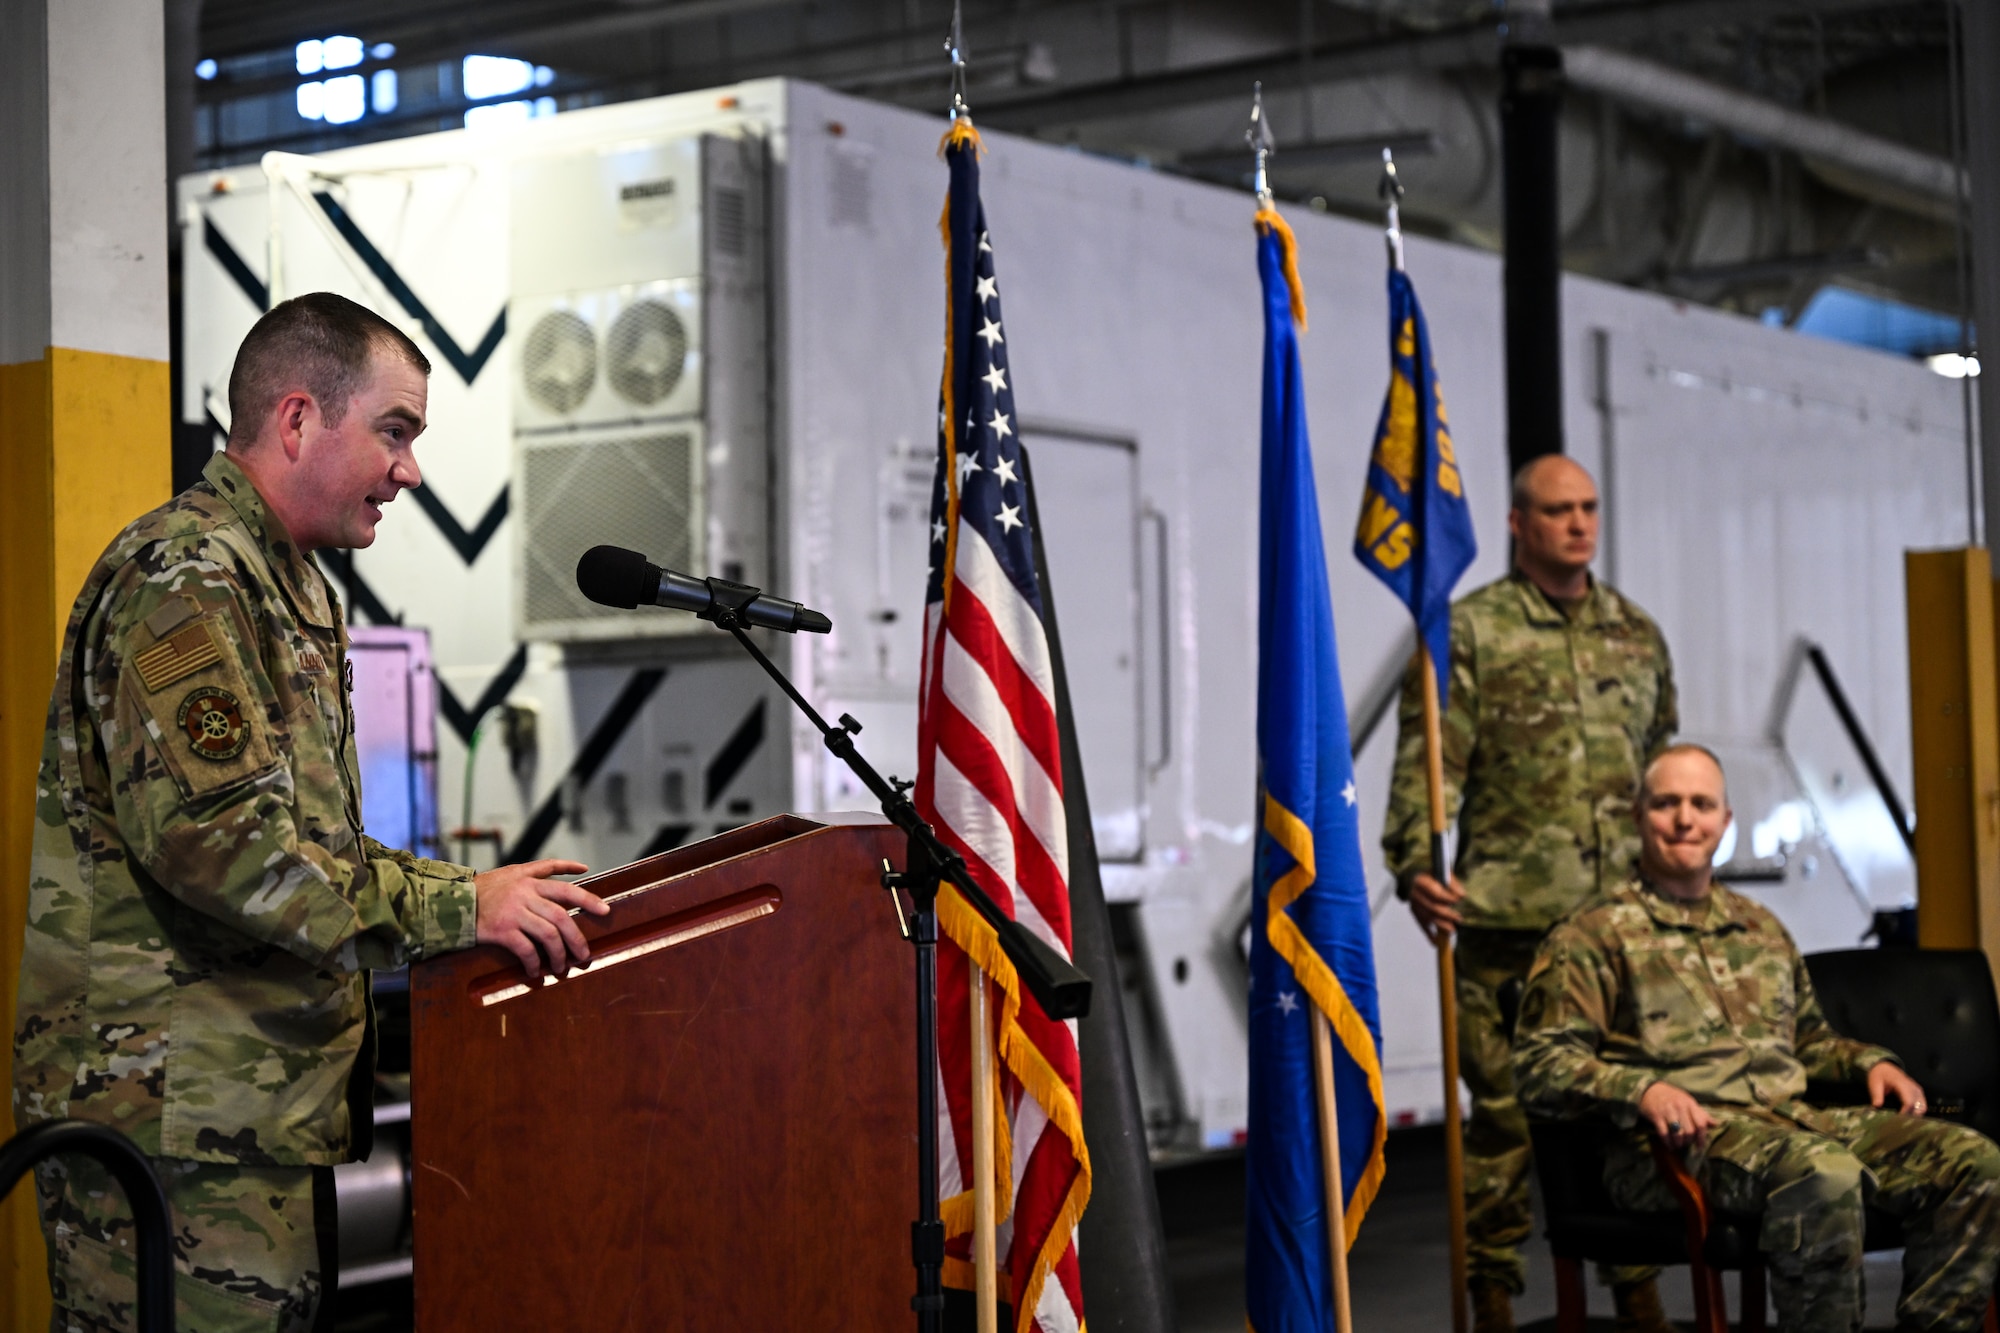 Maj. Kevin Shannon, 90th Munitions Squadron outgoing commander, shares final remarks during the 90 MUNS Change of Command Ceremony on F.E. Warren Air Force Base, Wyoming, May 30, 2023. A change of command represents a formal transfer of authority and responsibility from the outgoing commander to the incoming commander. (U.S. Air Force photo by Joseph Coslett Jr.)